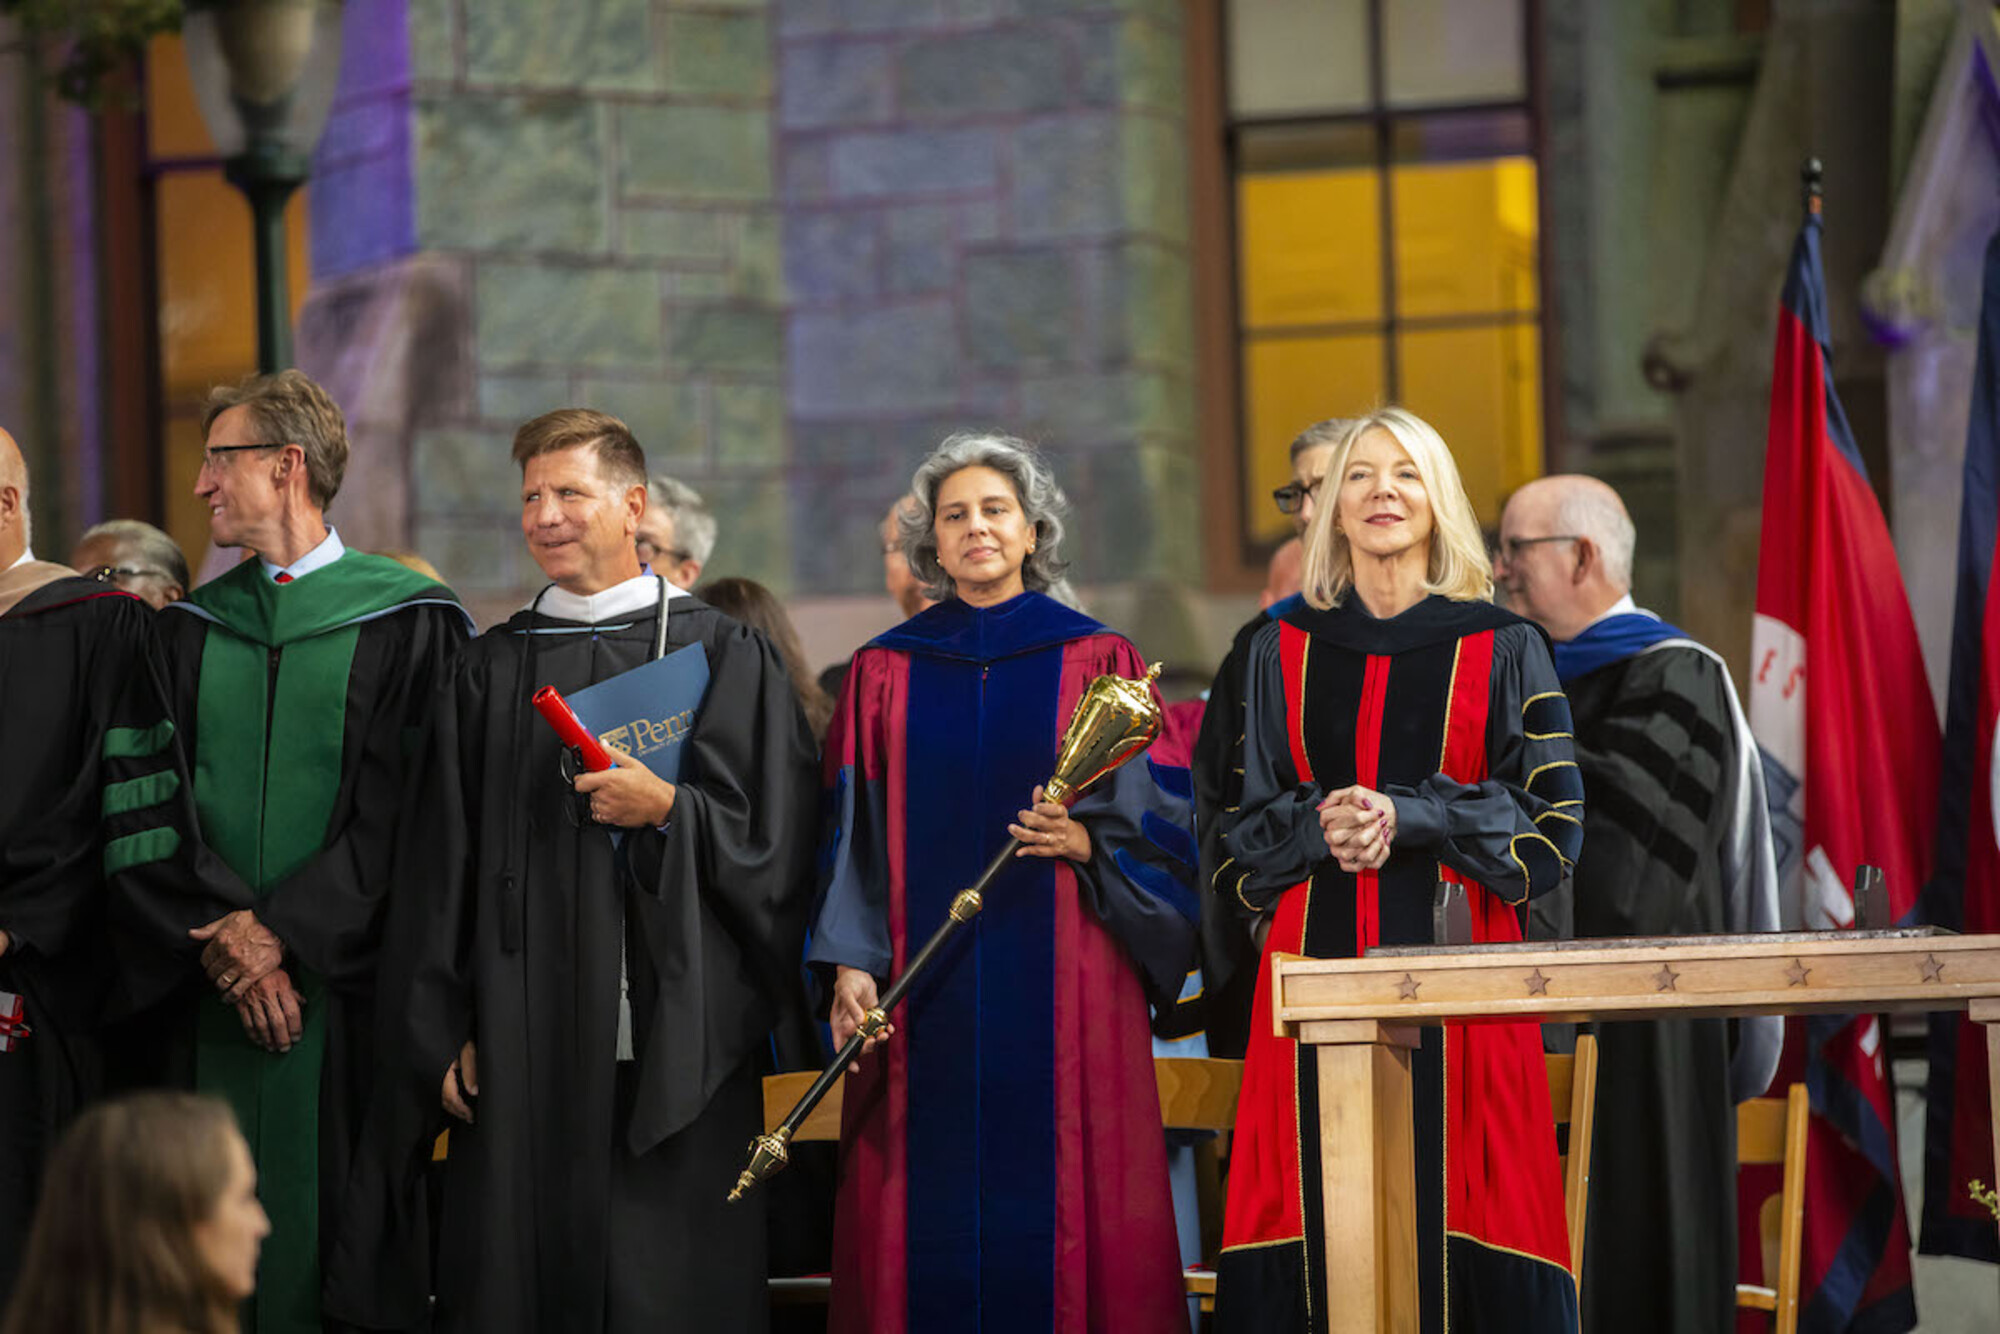 Several people in academic regalia onstage in front of College Hall, including Amy Gutmann at left and Medha Narvekar to her right, holding a mace. 